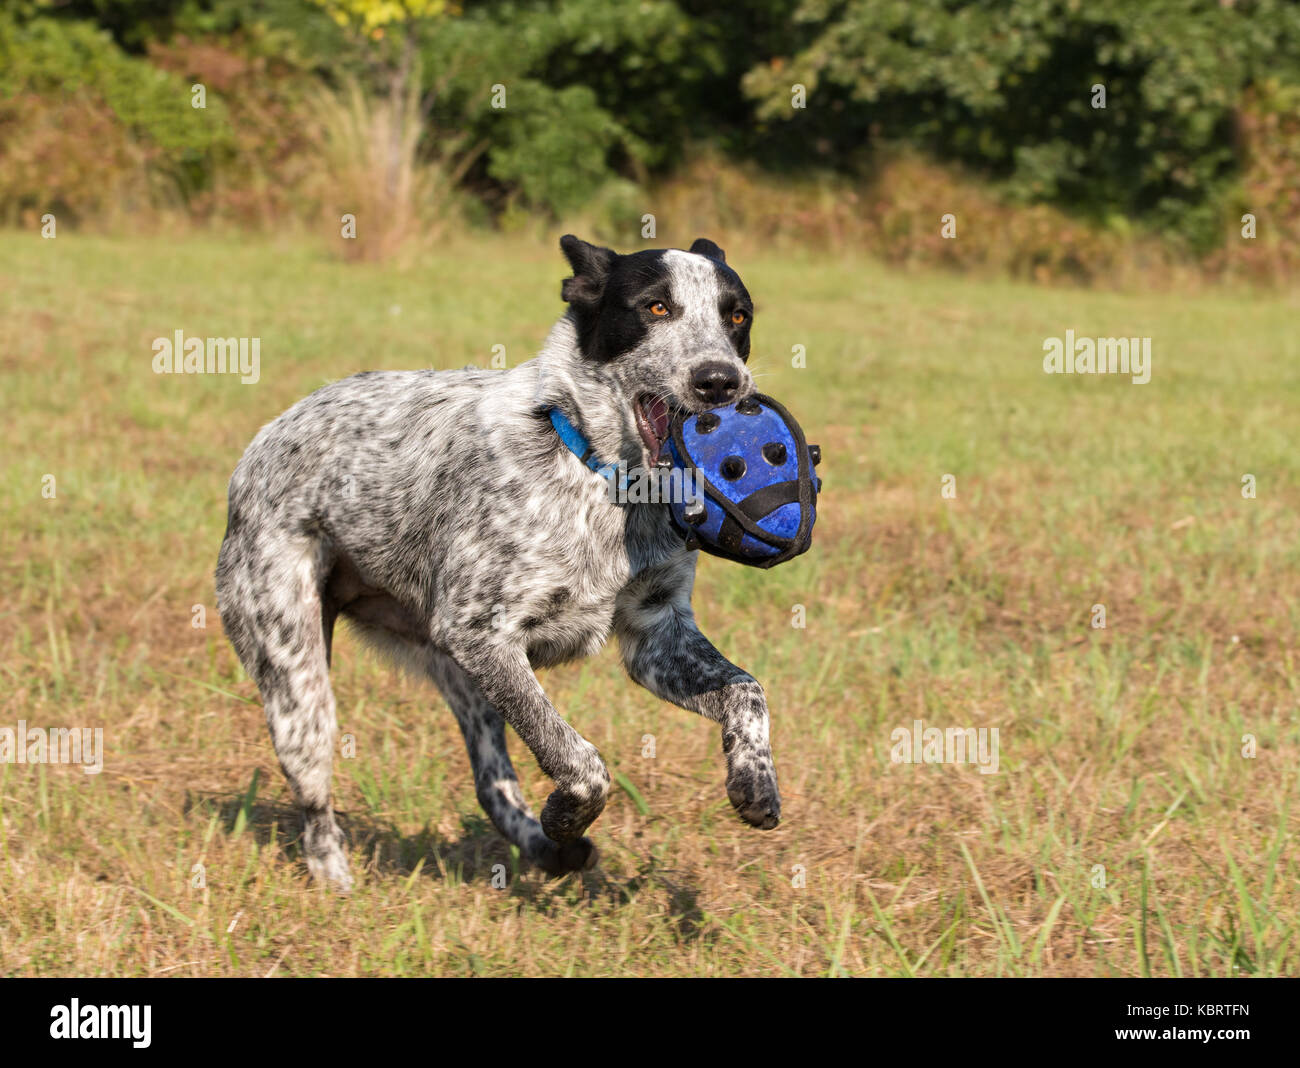 Texas Heeler running fast carrying a ball in her mouth Stock Photo